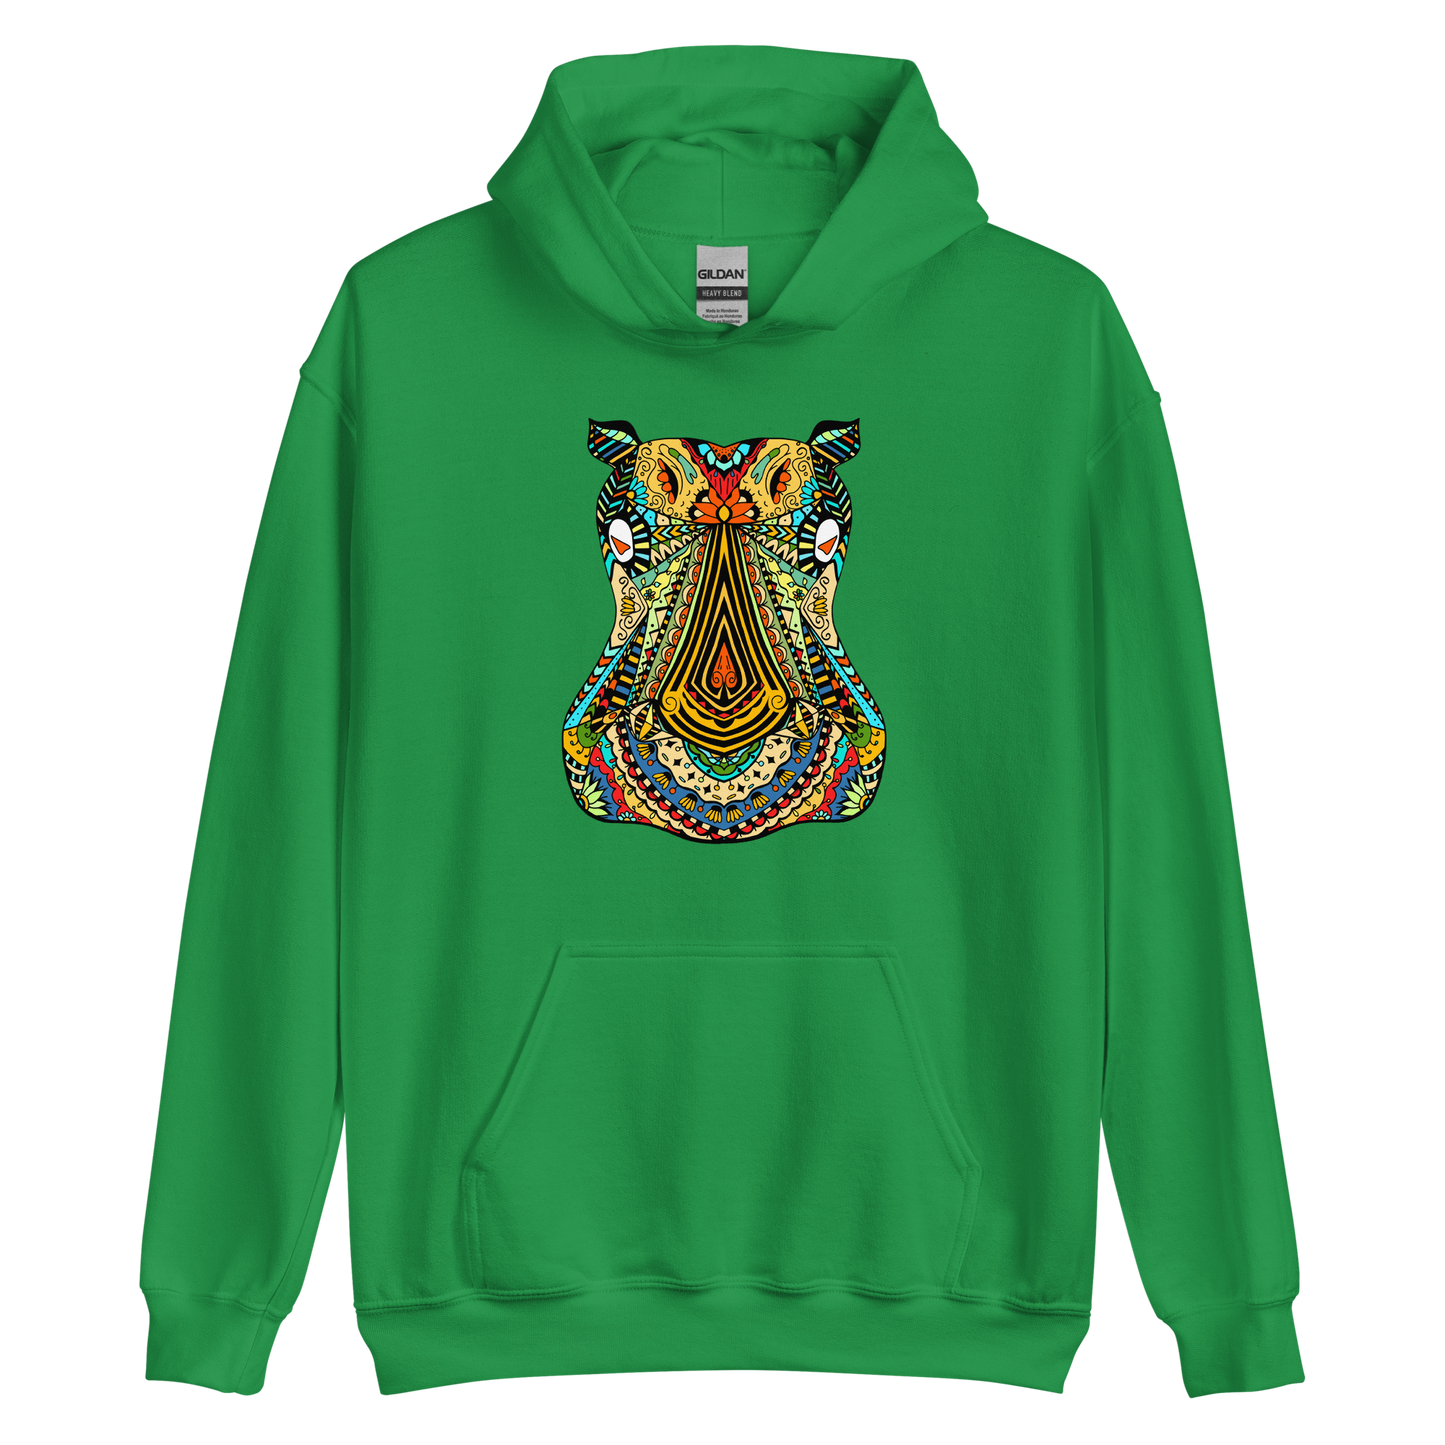 Irish Green Hippo Hoodie featuring a captivating Zentangle Hippo graphic on the chest - Cool Graphic Hippo Hoodies - Boozy Fox